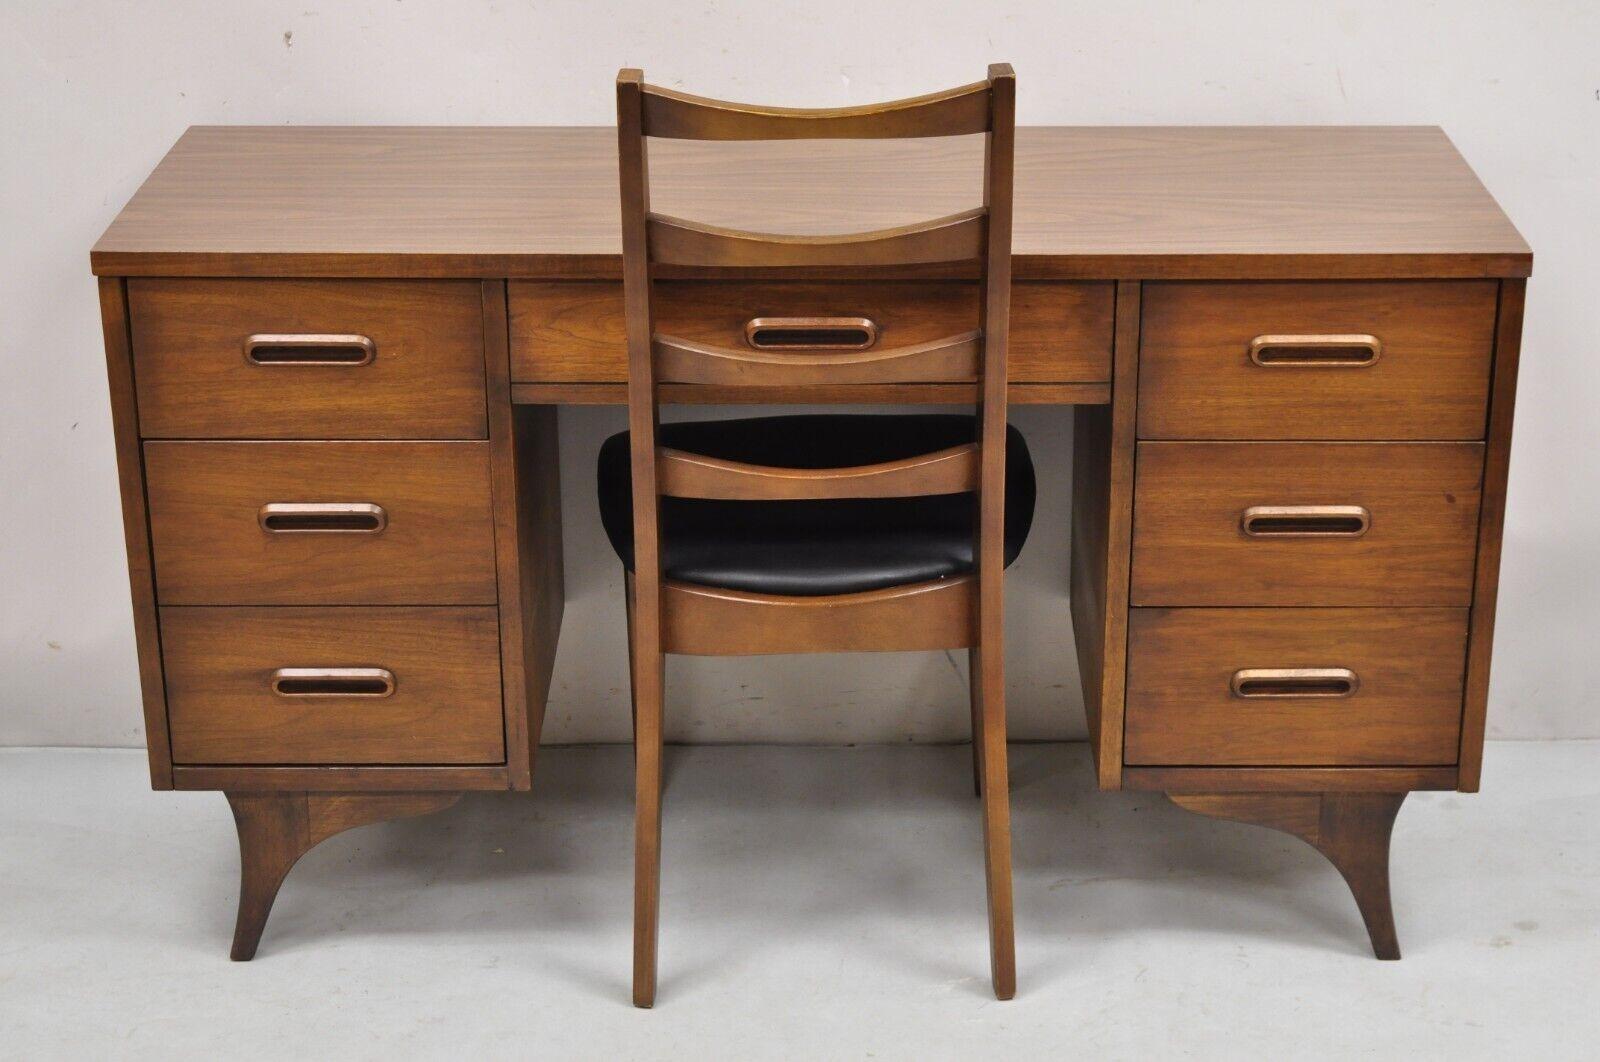 Vintage Mid Century Modern Walnut Sculpted Legs Kneehole Desk & Chair - 2 Pc Set. Item features a brown laminated top, 6 dovetailed drawers, sculpted wood drawer pulls and legs, ladderback chair, clean Modernist lines. Circa Mid 20th